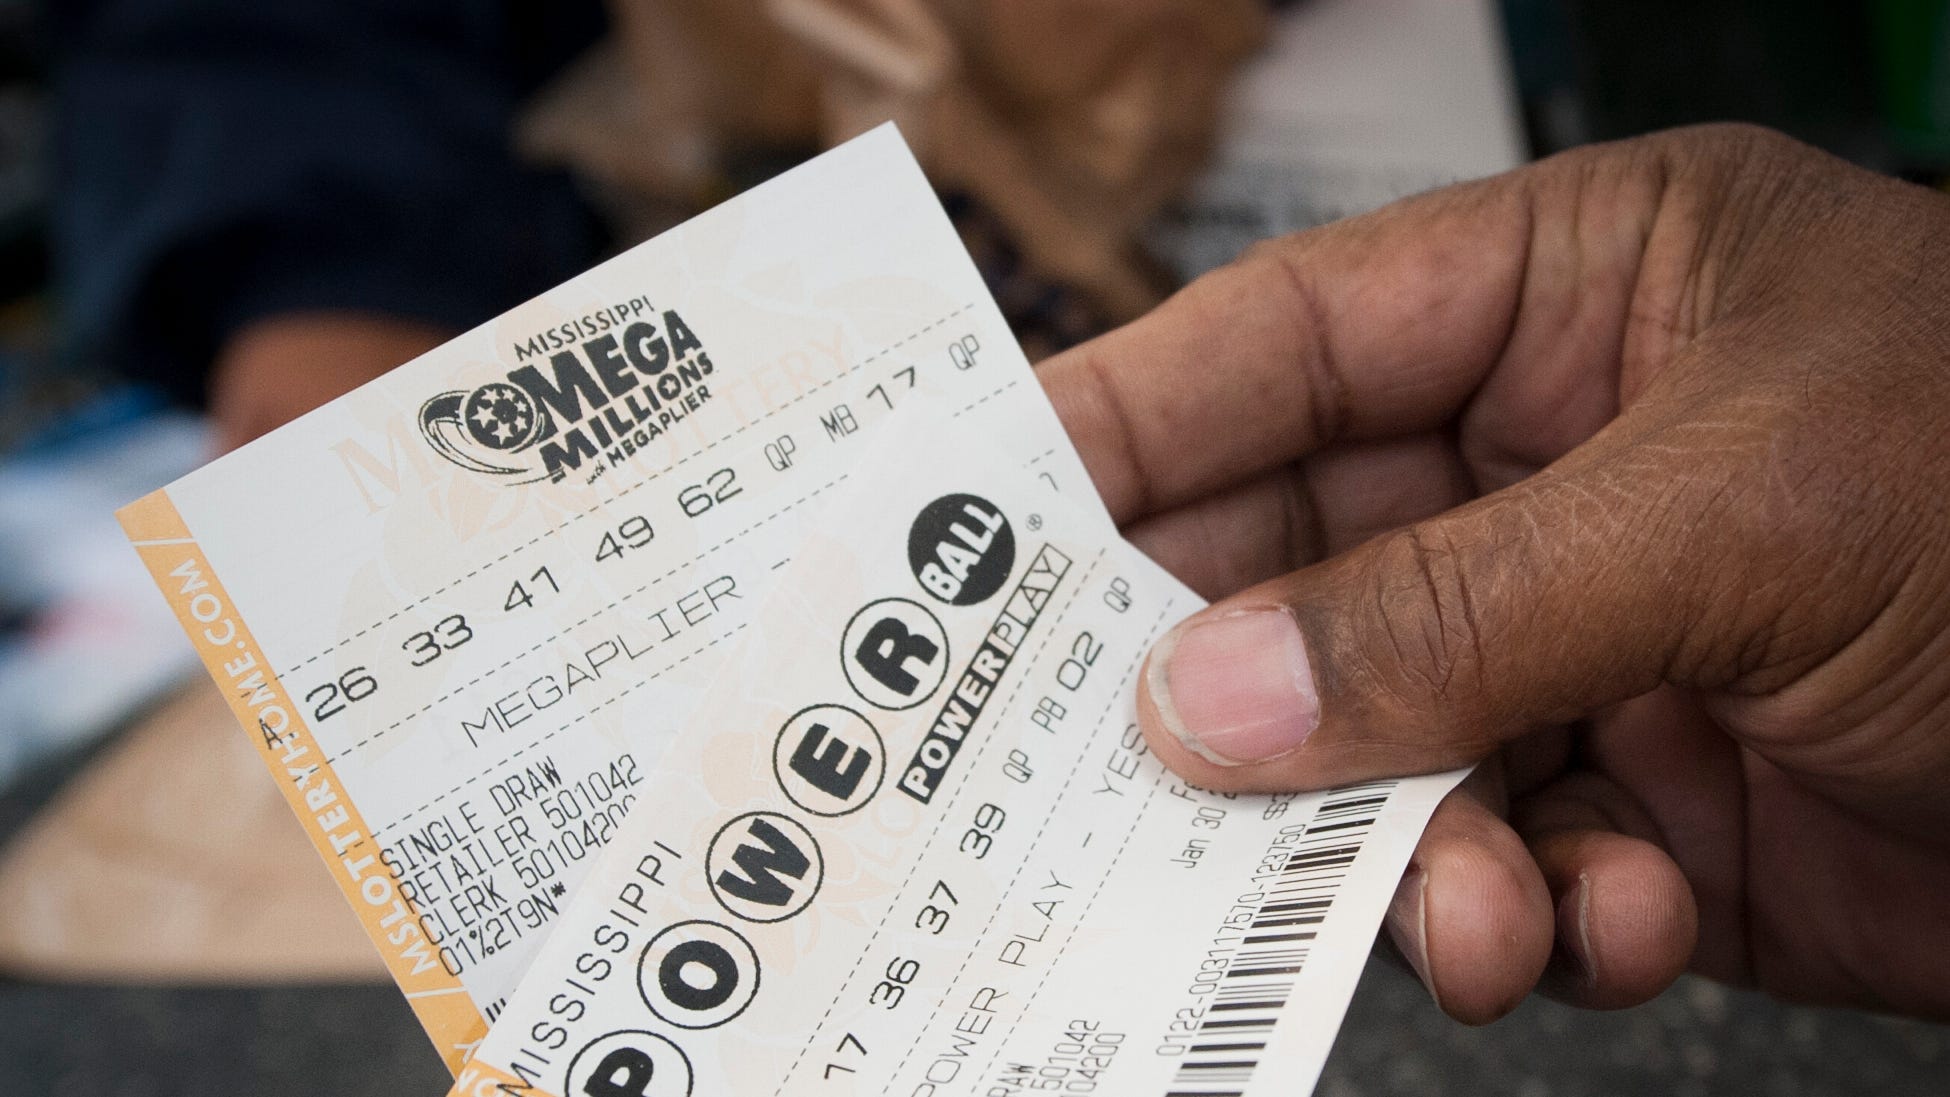 Mississippi Lottery Vicksburg Powerball player wins 1M in drawing